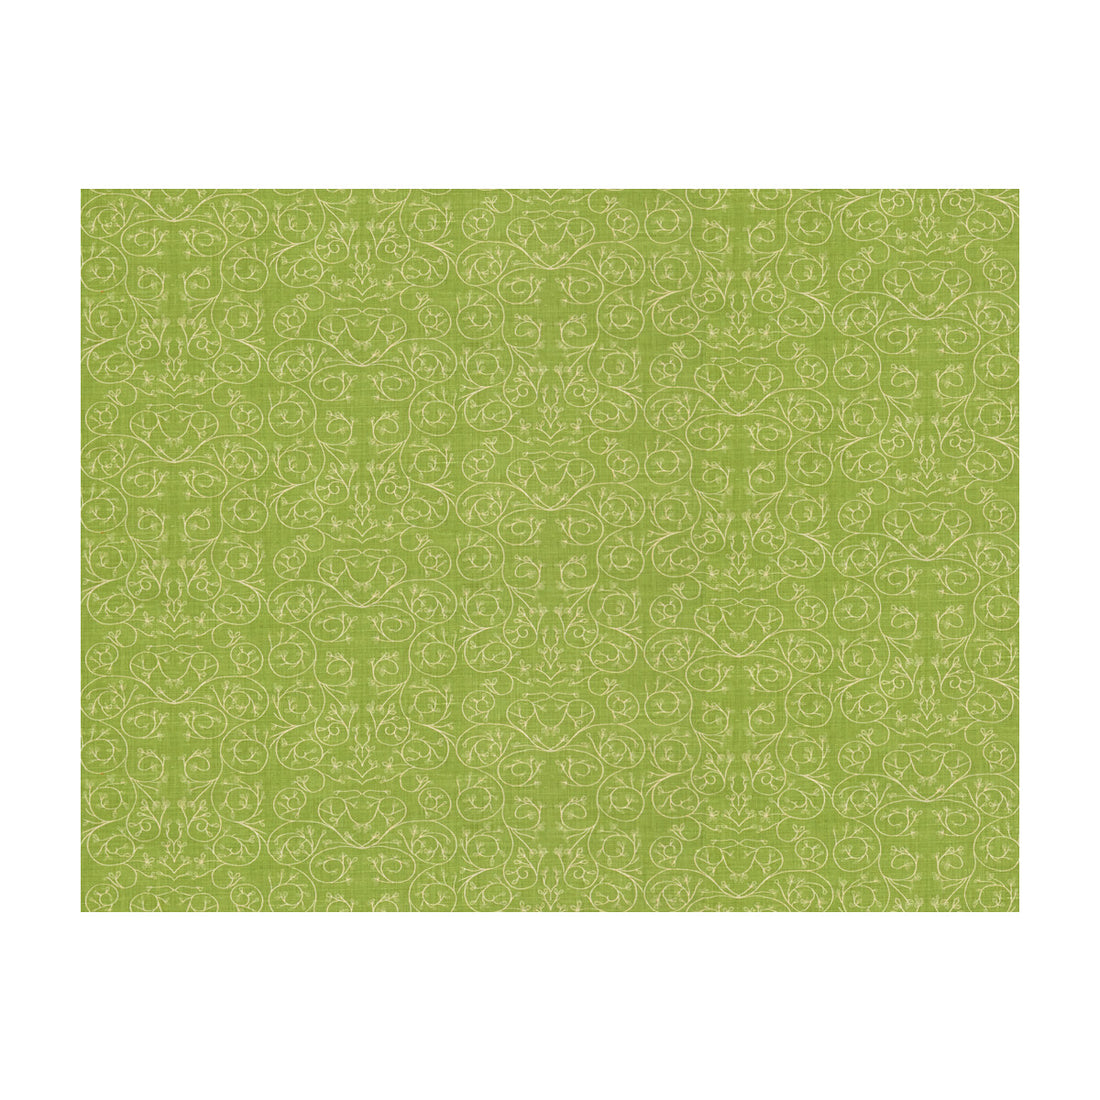 Garden Reverse fabric in meadow color - pattern GWF-3512.3.0 - by Lee Jofa Modern in the Allegra Hicks Garden collection